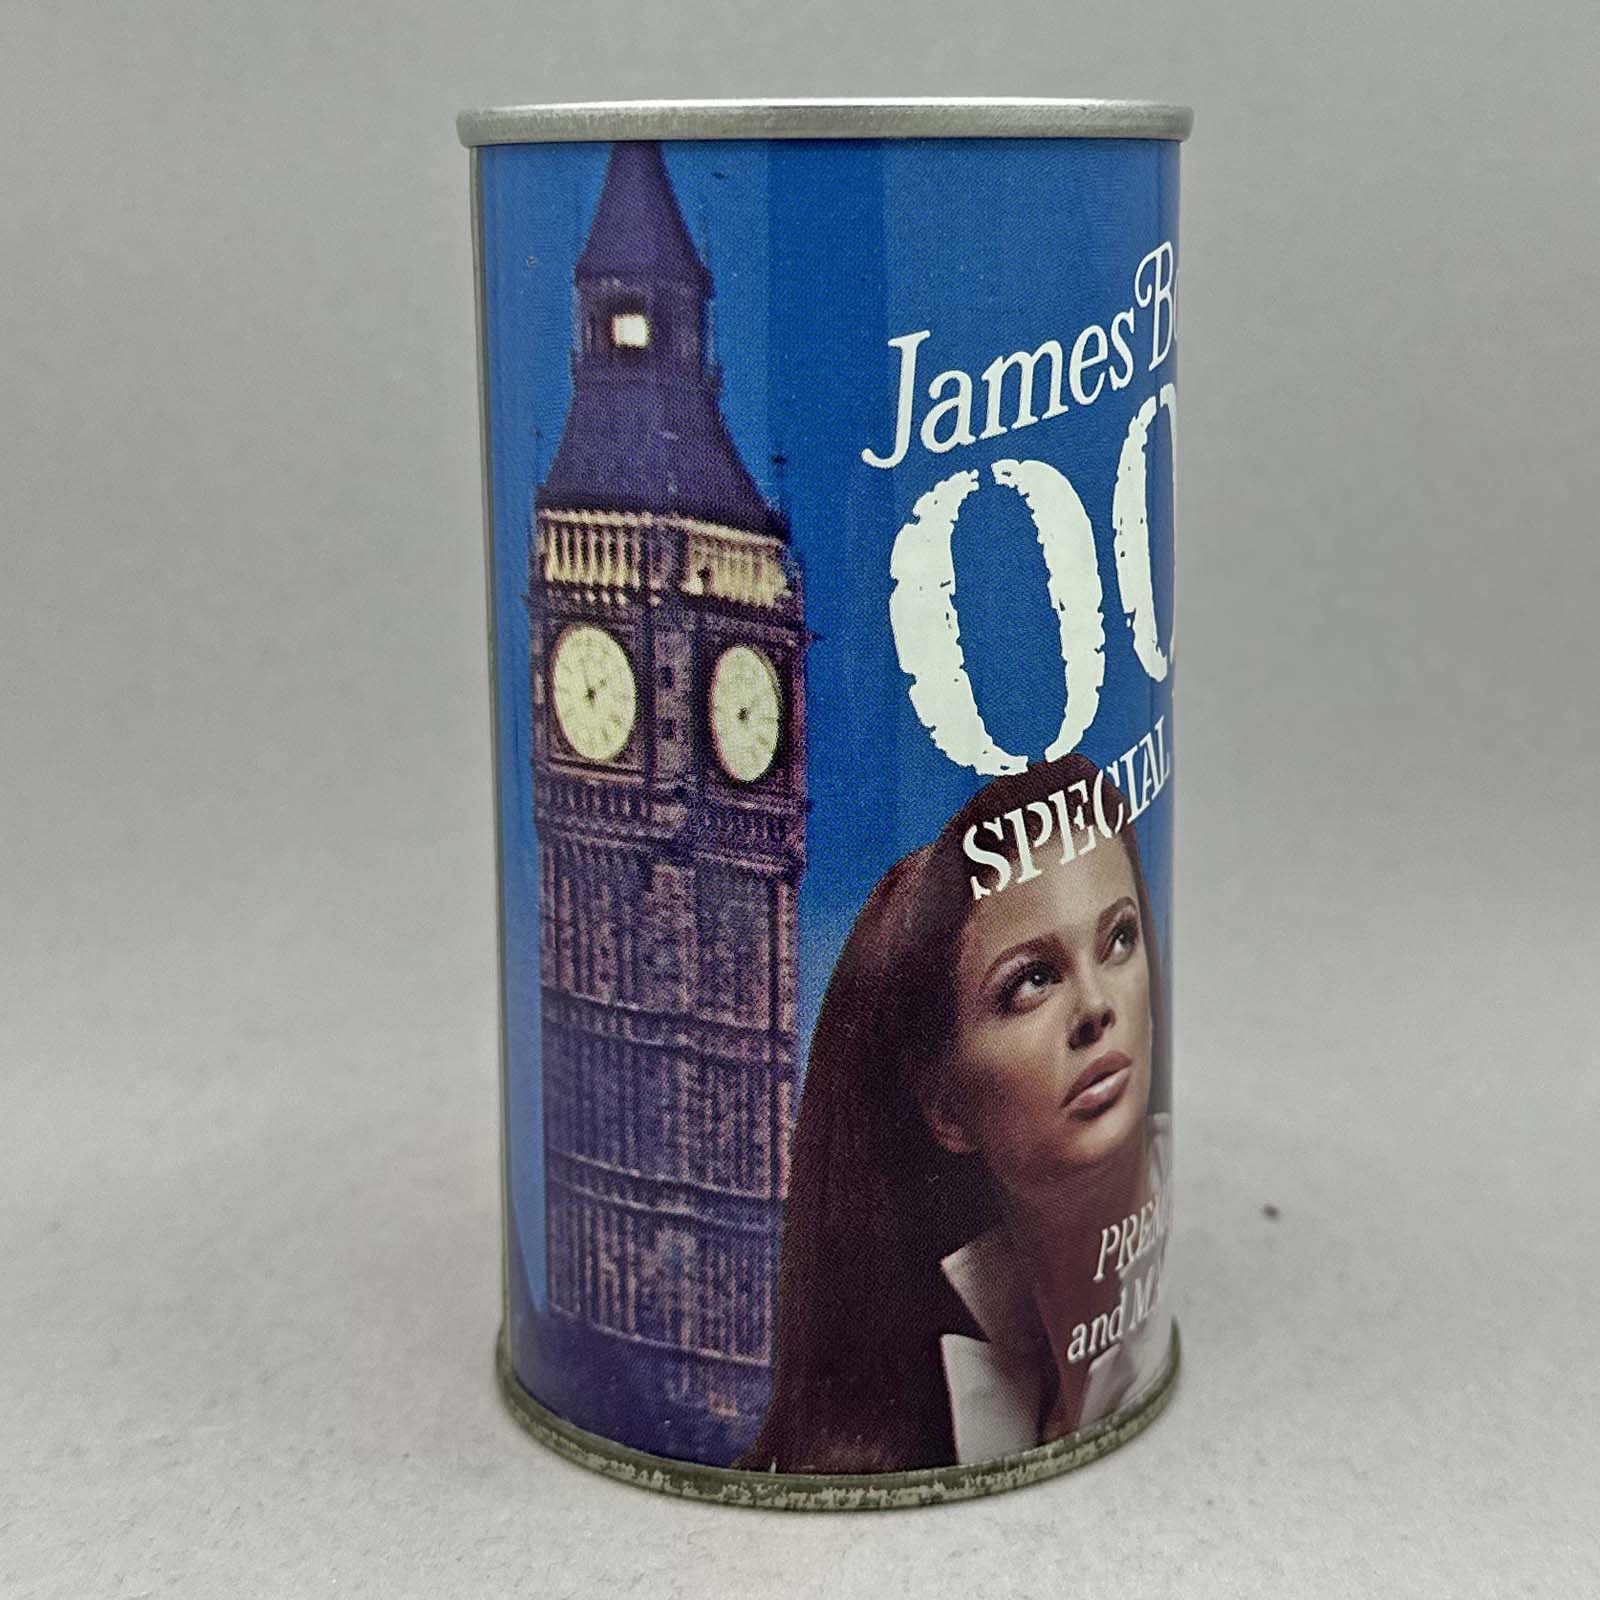 007 82-30 pull tab beer can 4